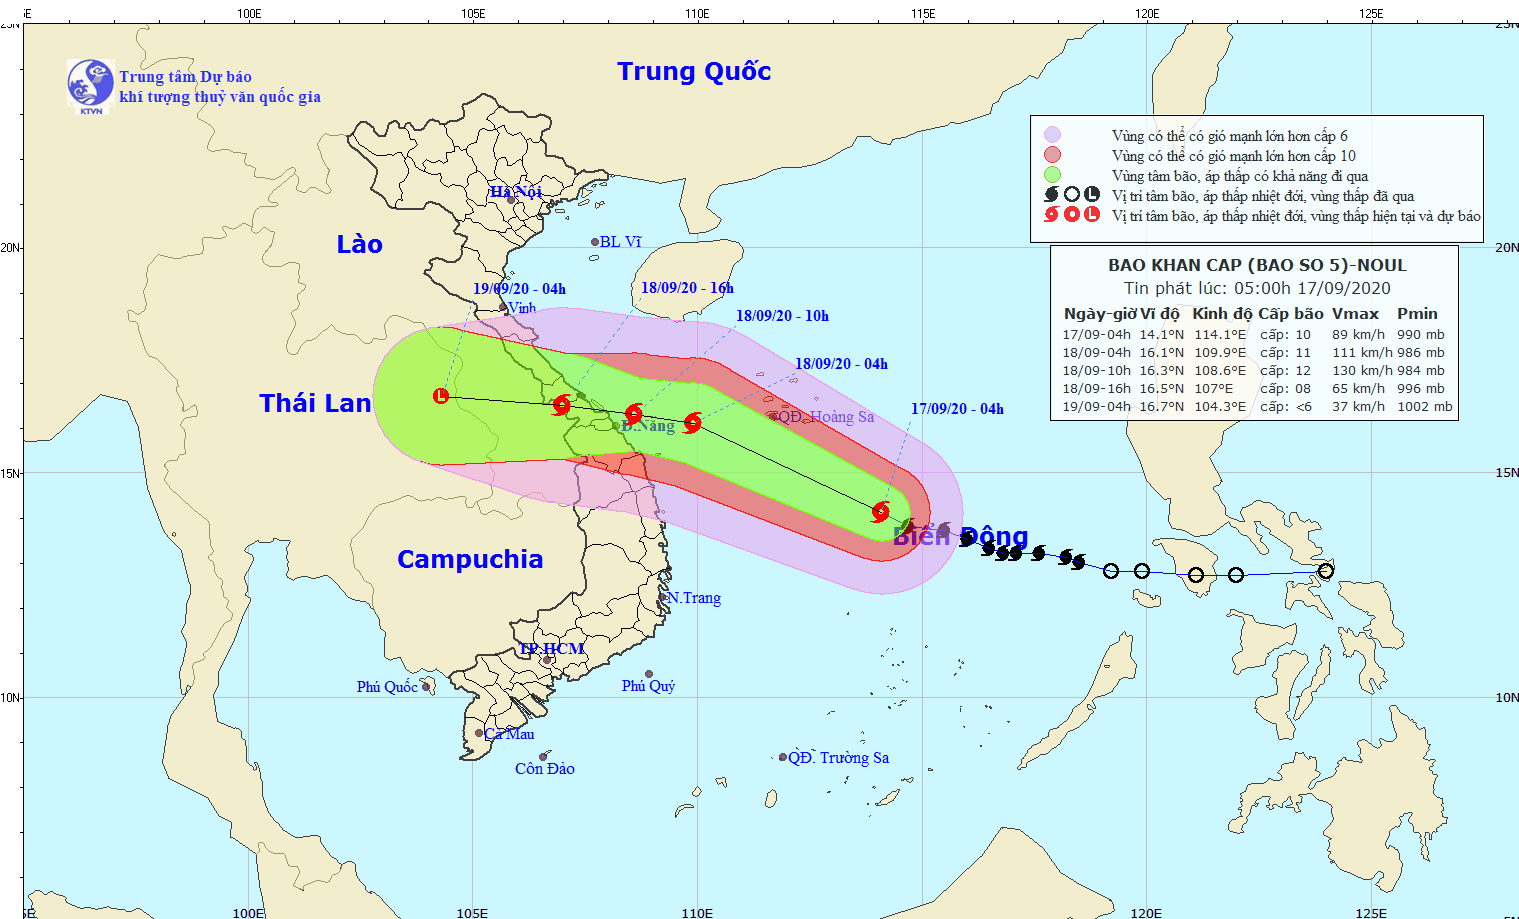 Path map of typhoon Noul is released by the National Center for Hydro-meteorology Forecasting